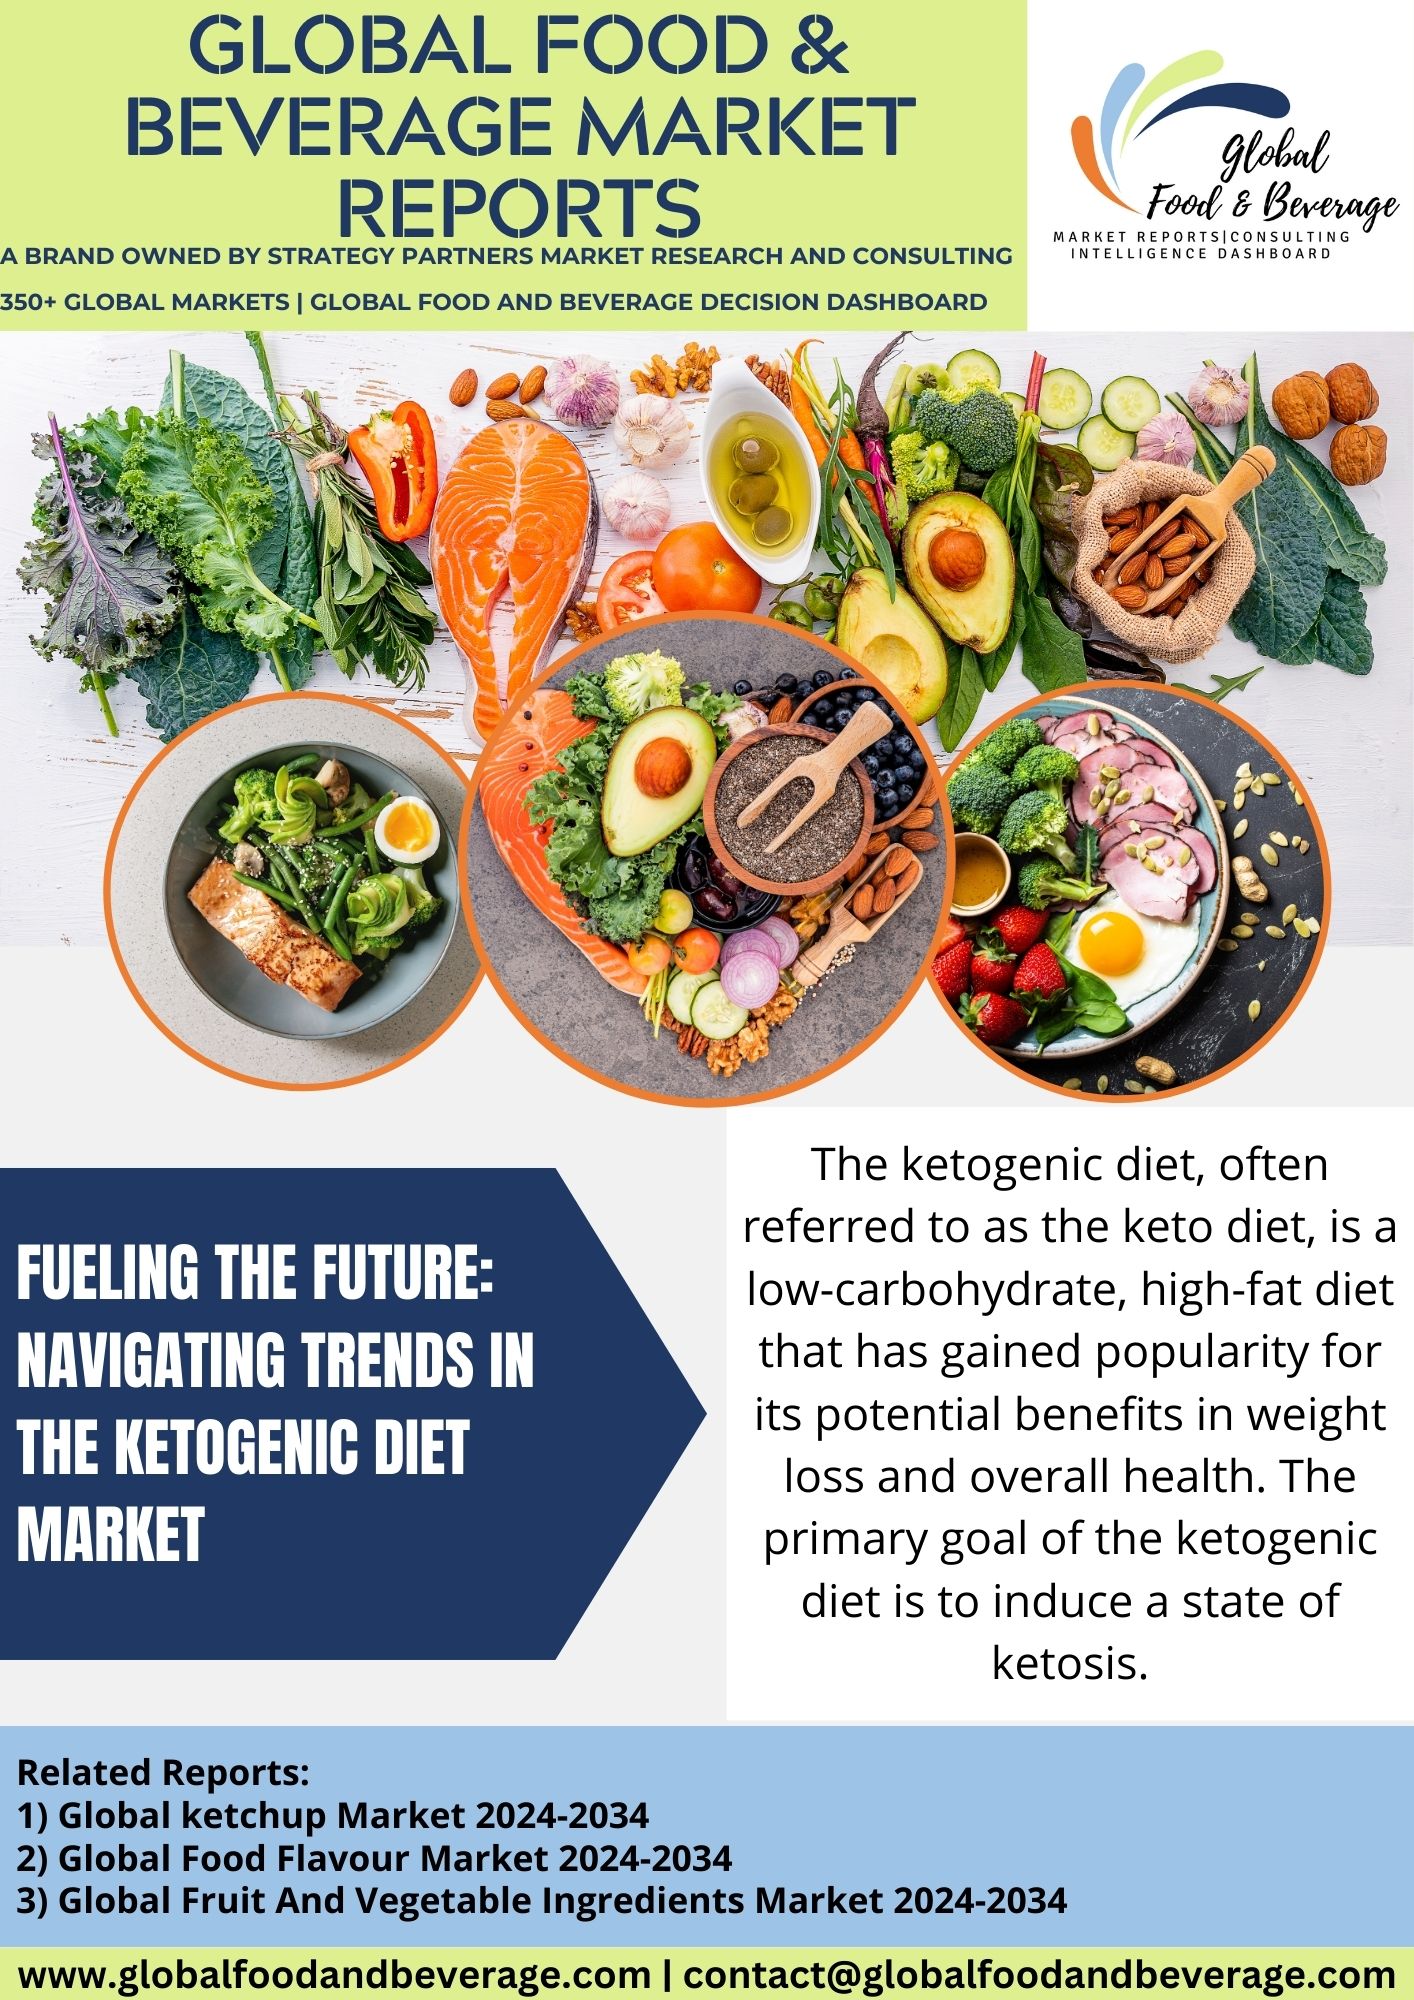 Fueling the Future: Navigating Trends in the Ketogenic Diet Market